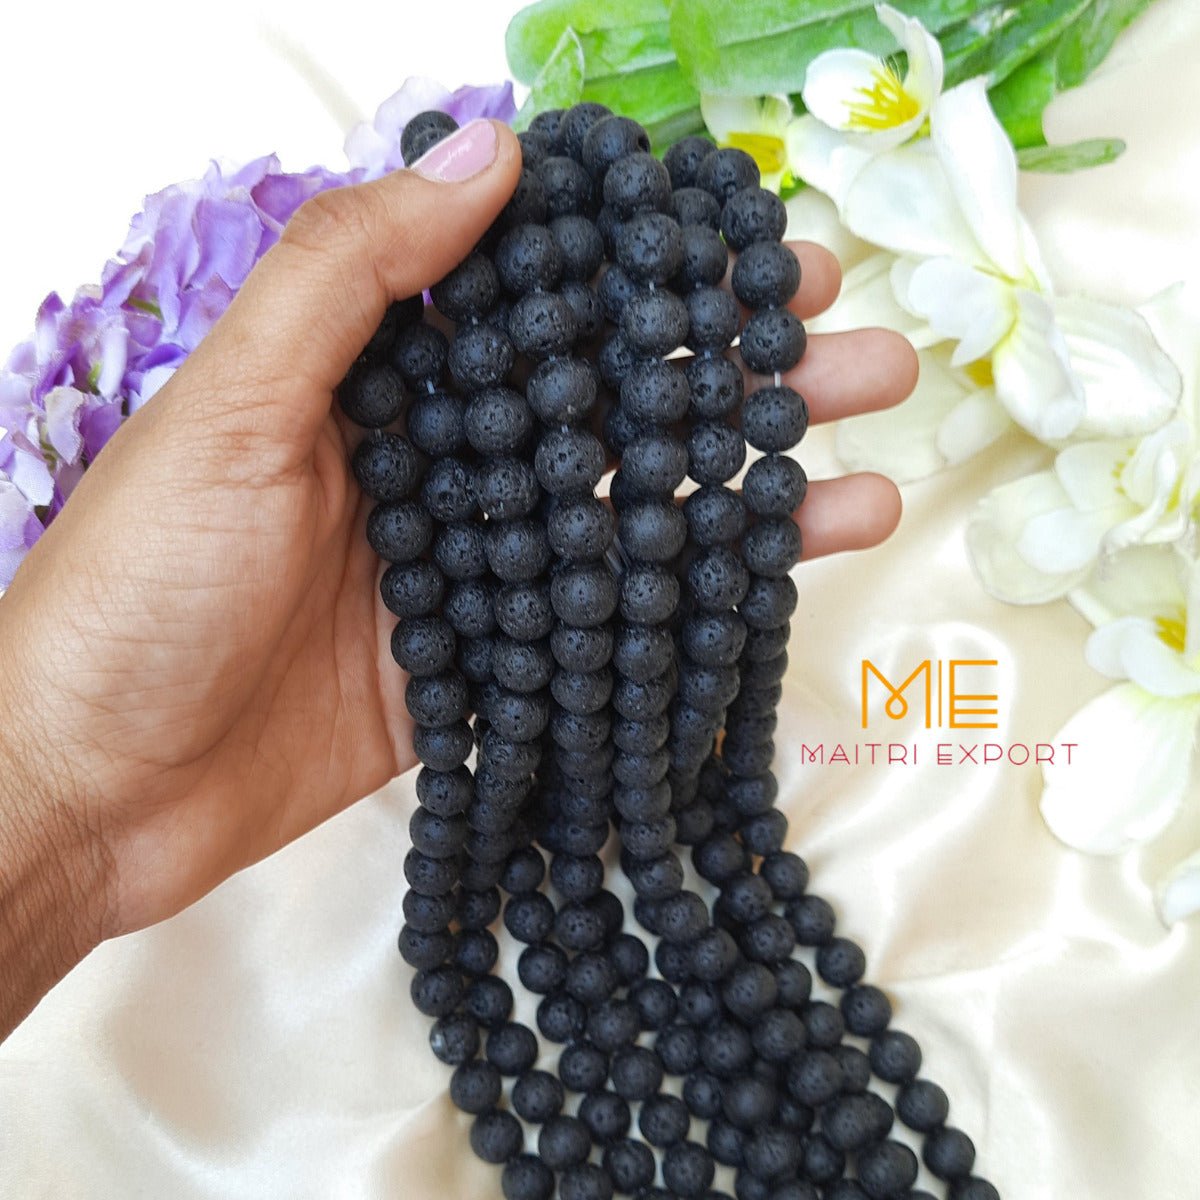 10mm round loose crystal beads strand / string-Lava-Maitri Export | Crystals Store